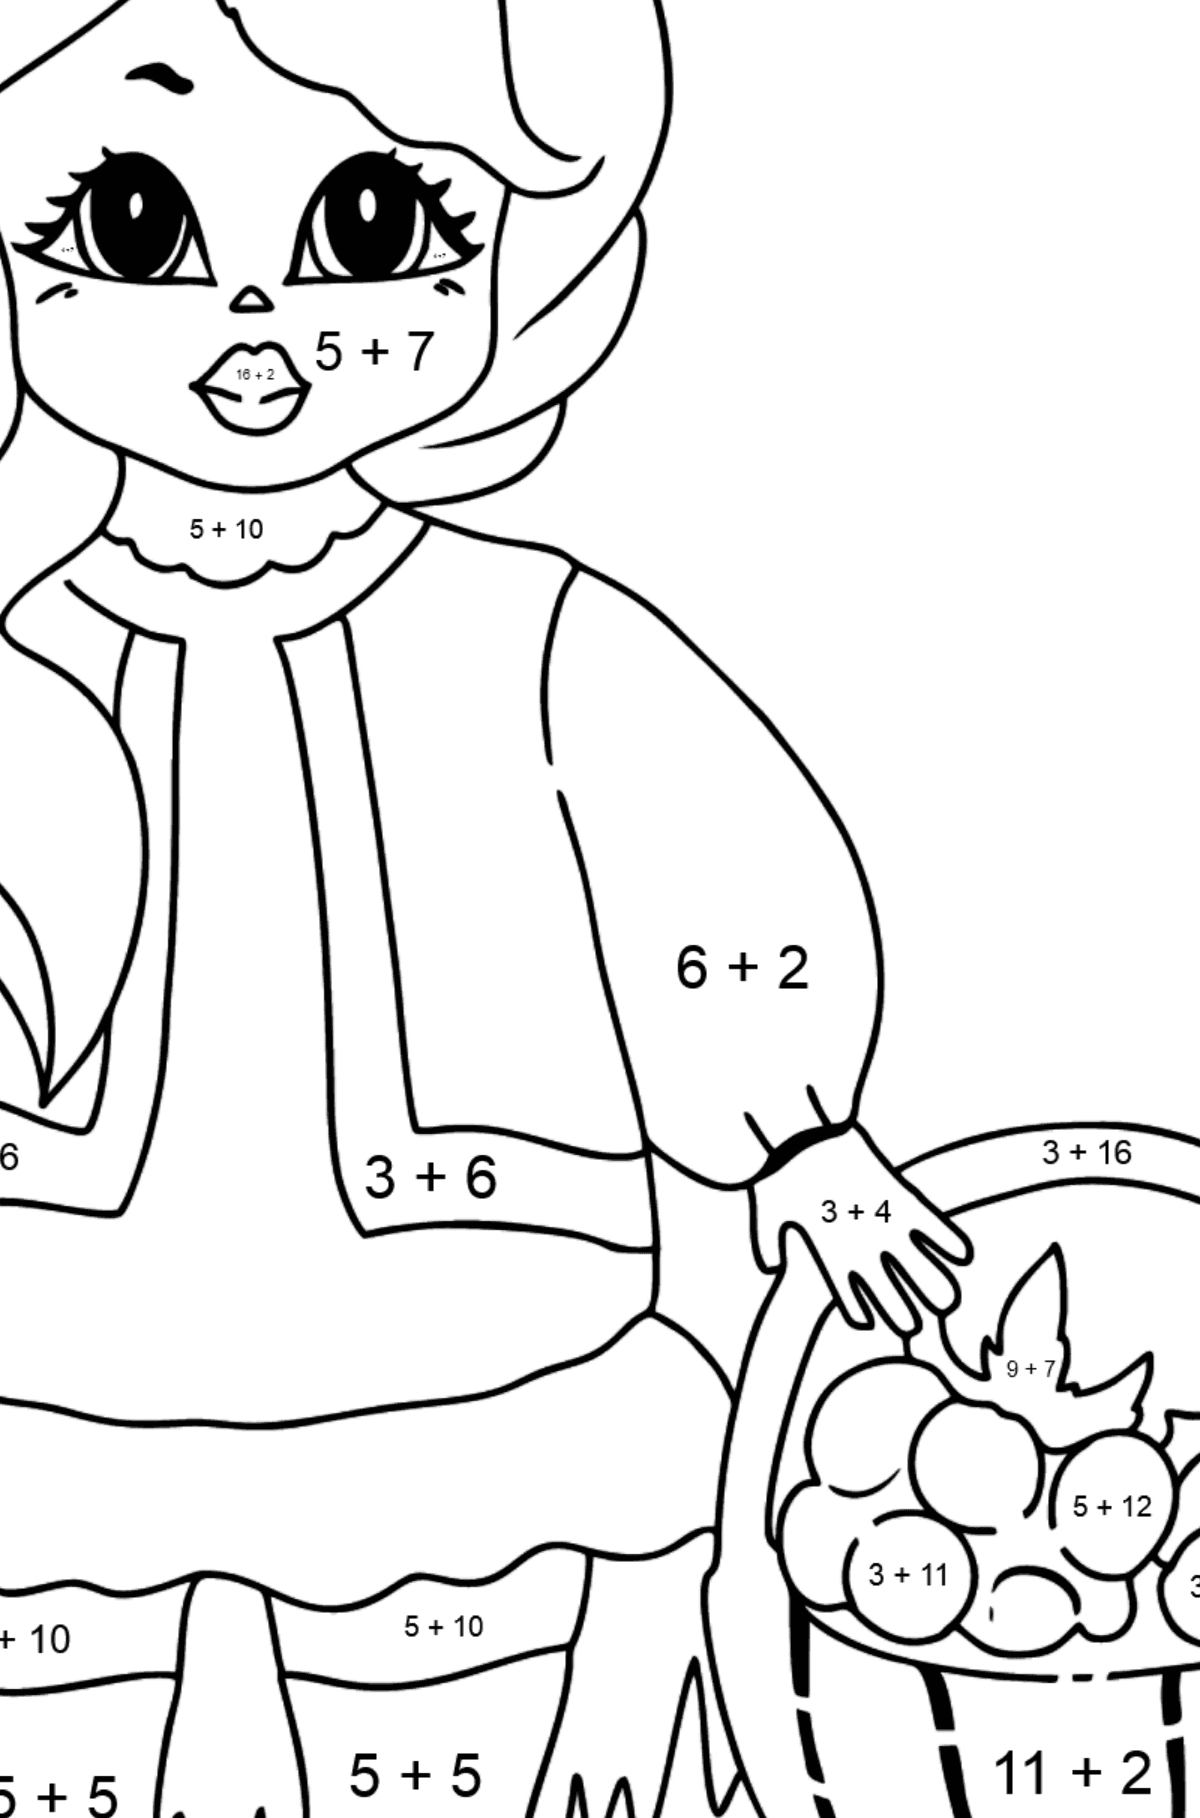 Coloring Page - A Princess with a Basket - Math Coloring - Addition for Kids